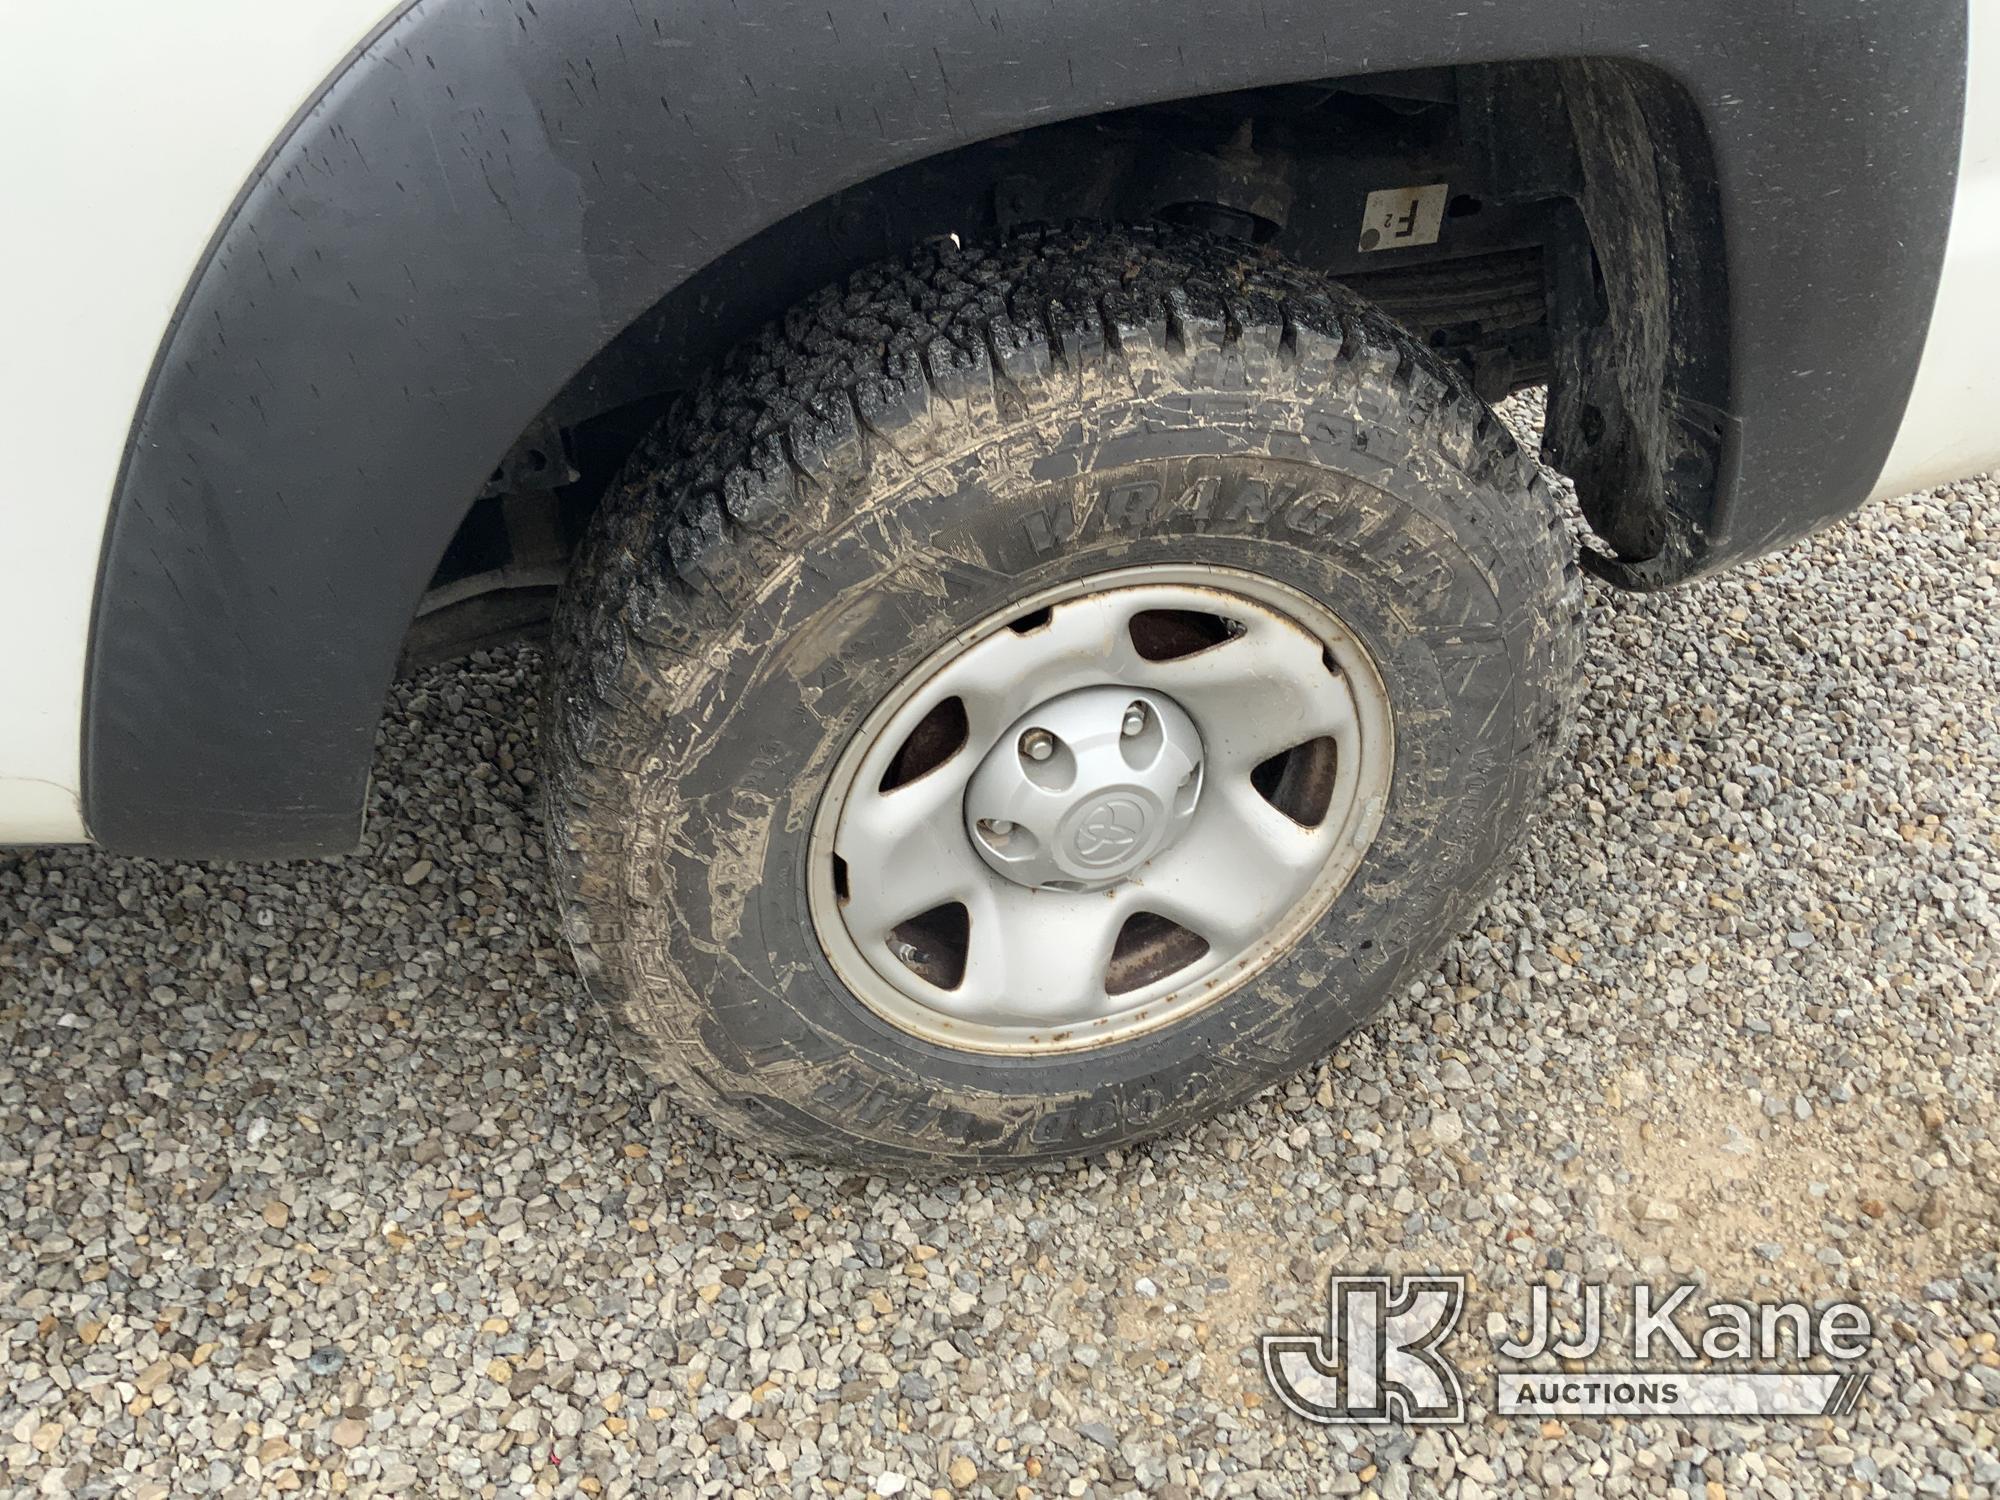 (Fort Wayne, IN) 2015 Toyota Tacoma 4x4 Extended-Cab Pickup Truck Runs & Moves) (Engine Light On